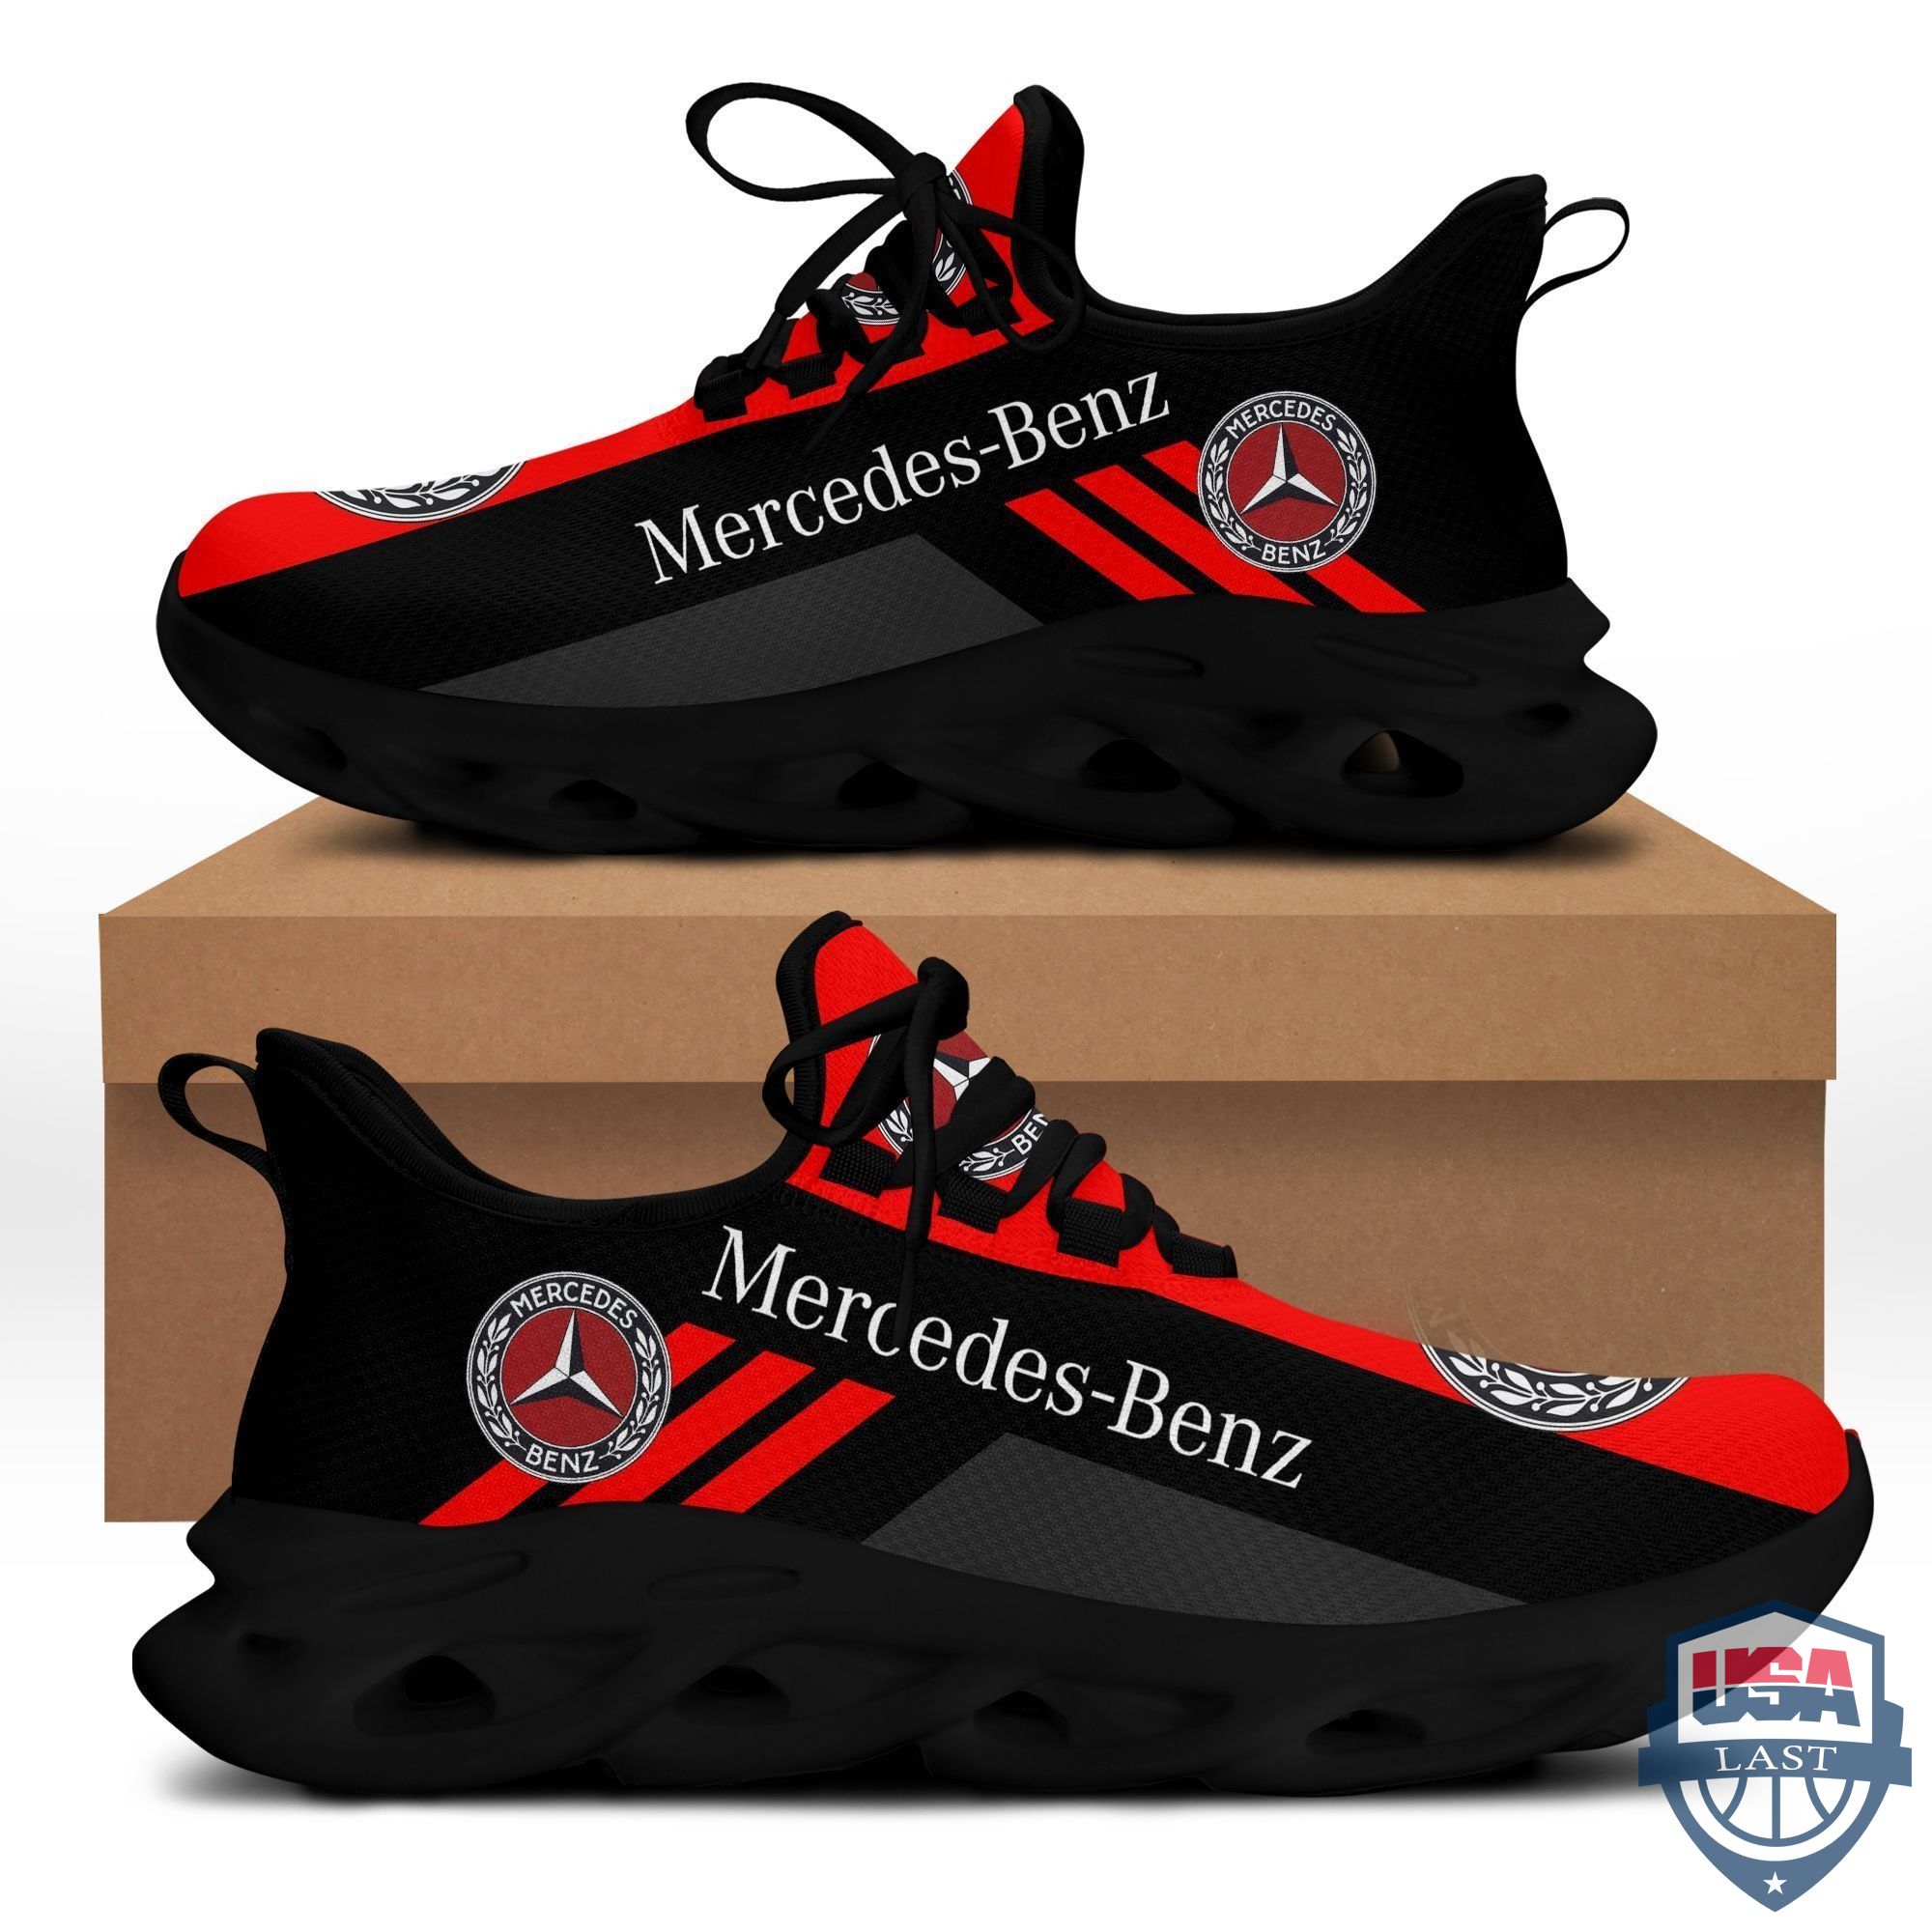 Top Trending – Mercedes Benz Amg Max Soul Shoes Red Version